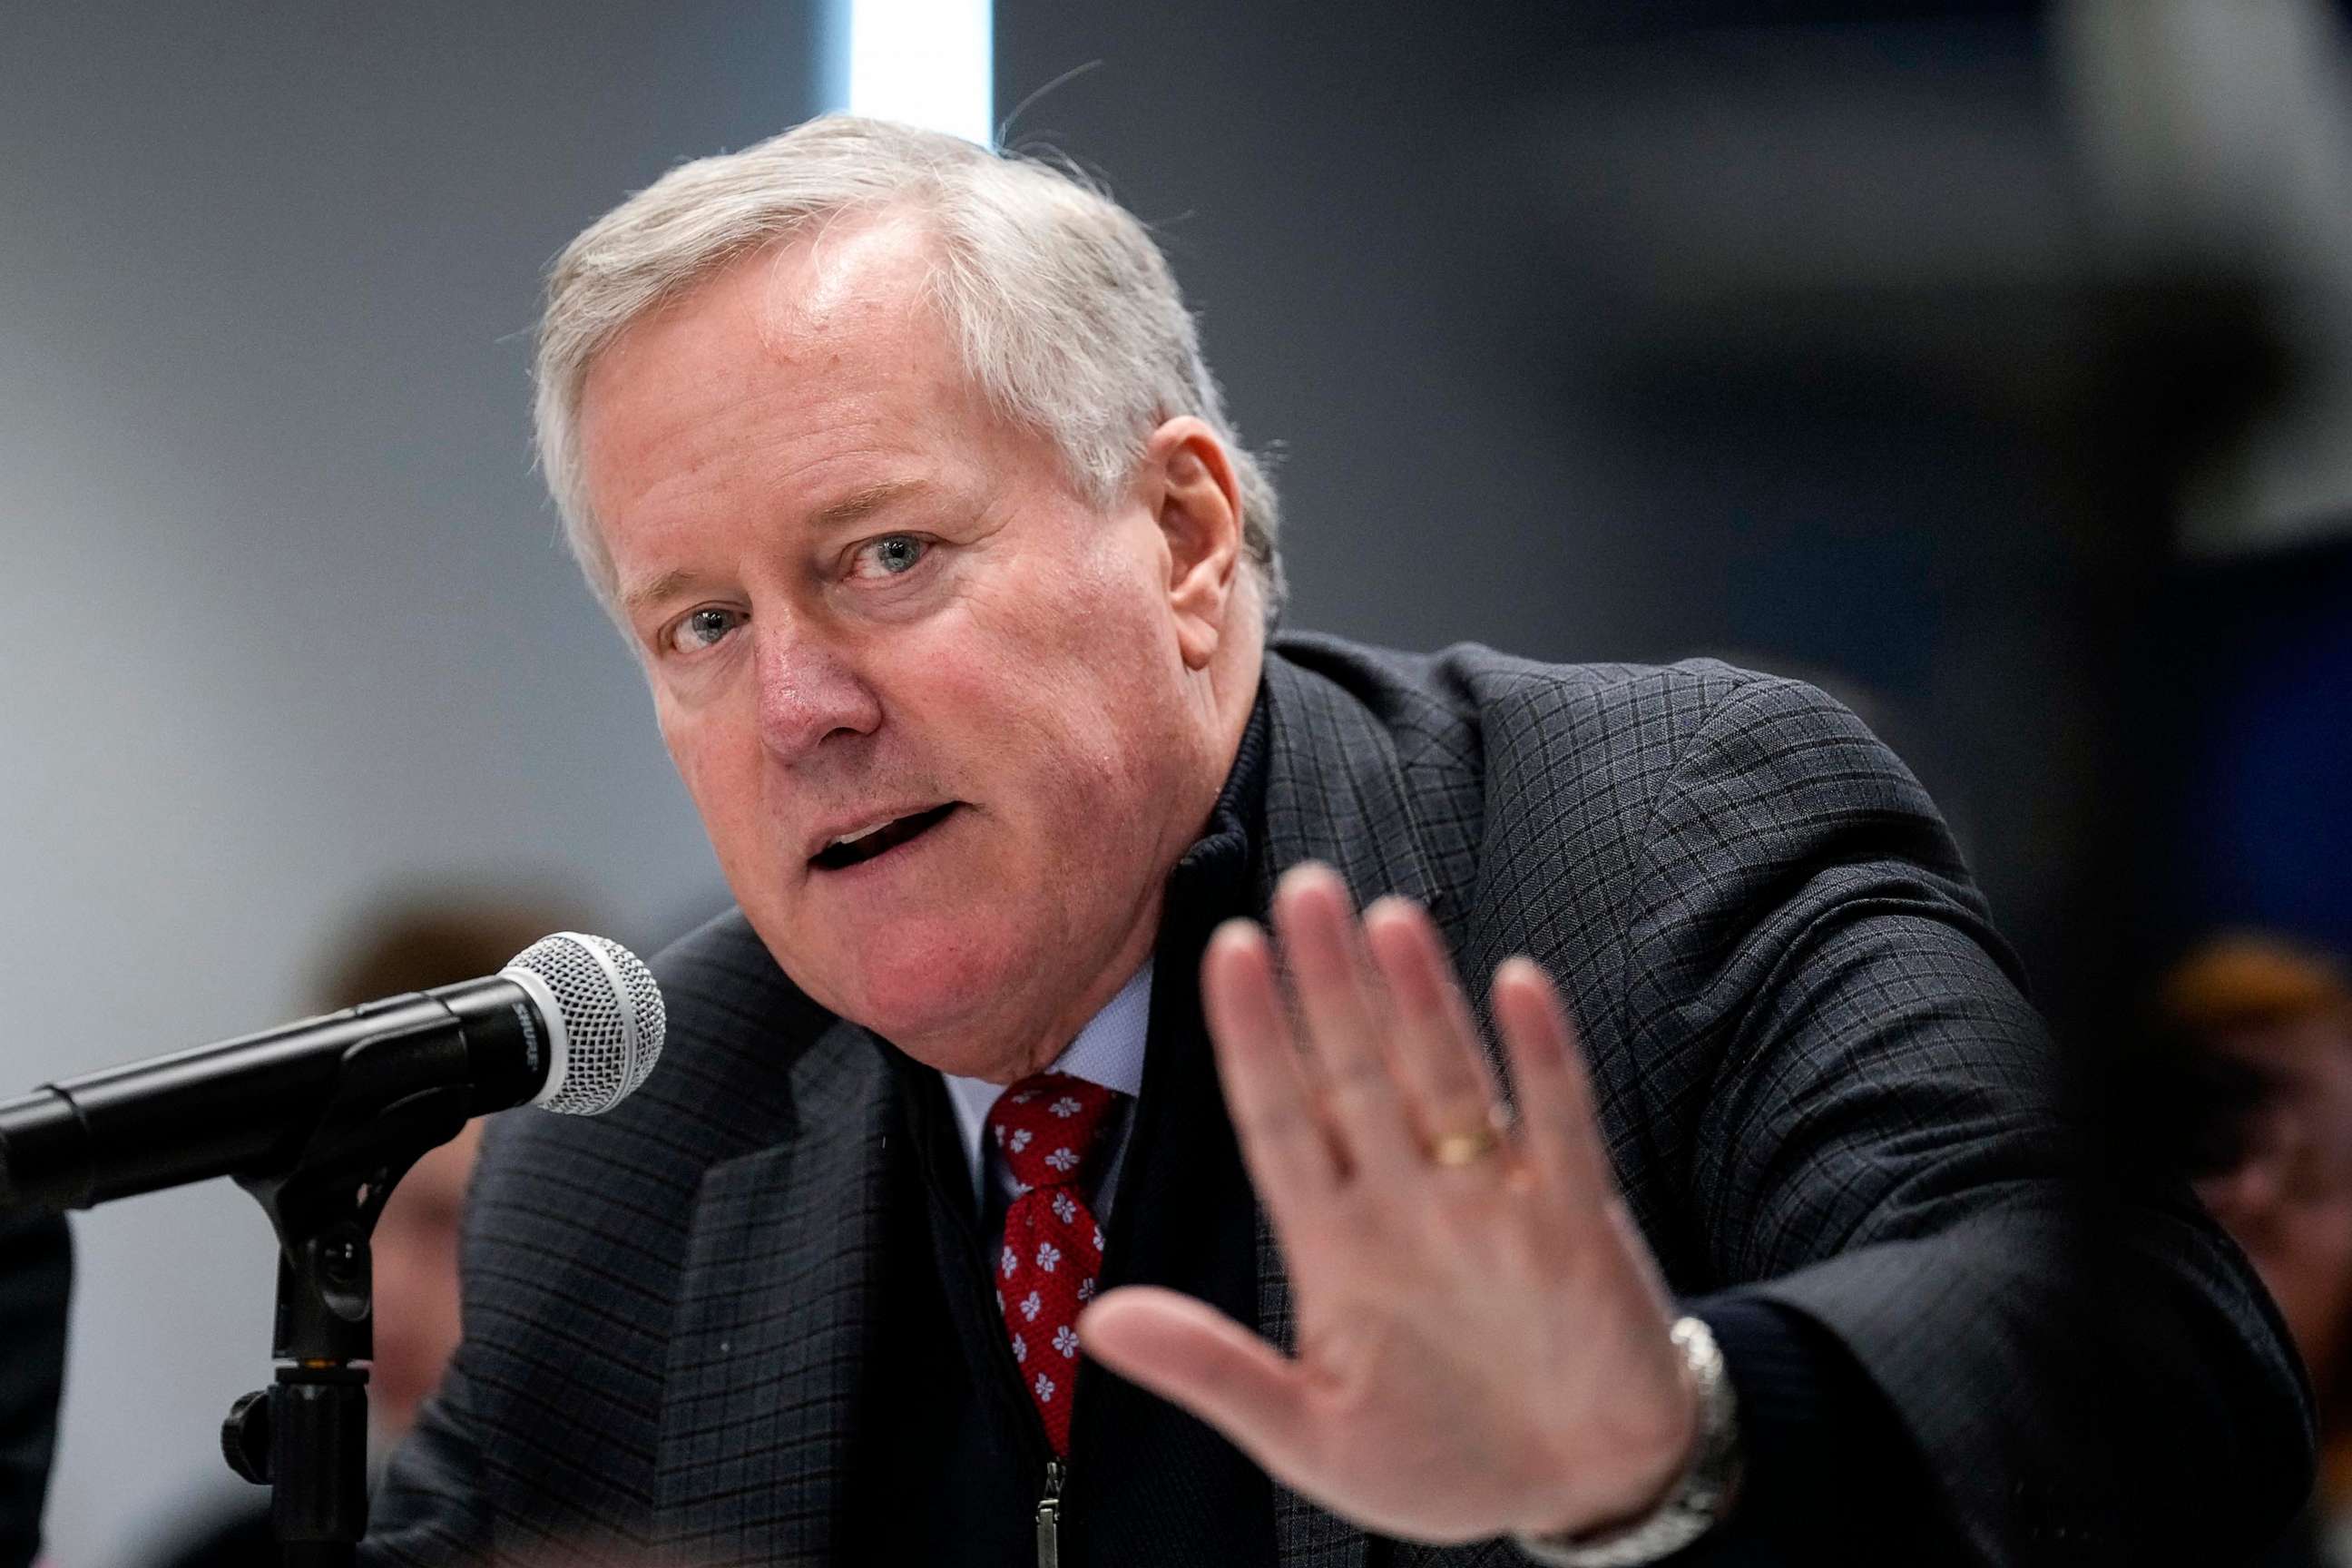 PHOTO: In this Nov. 14, 2022, file photo, former White House Chief of Staff during the Trump administration Mark Meadows speaks during a forum titled House Rules and Process Changes for the 118th Congress, at FreedomWorks headquarters in Washington, D.C.